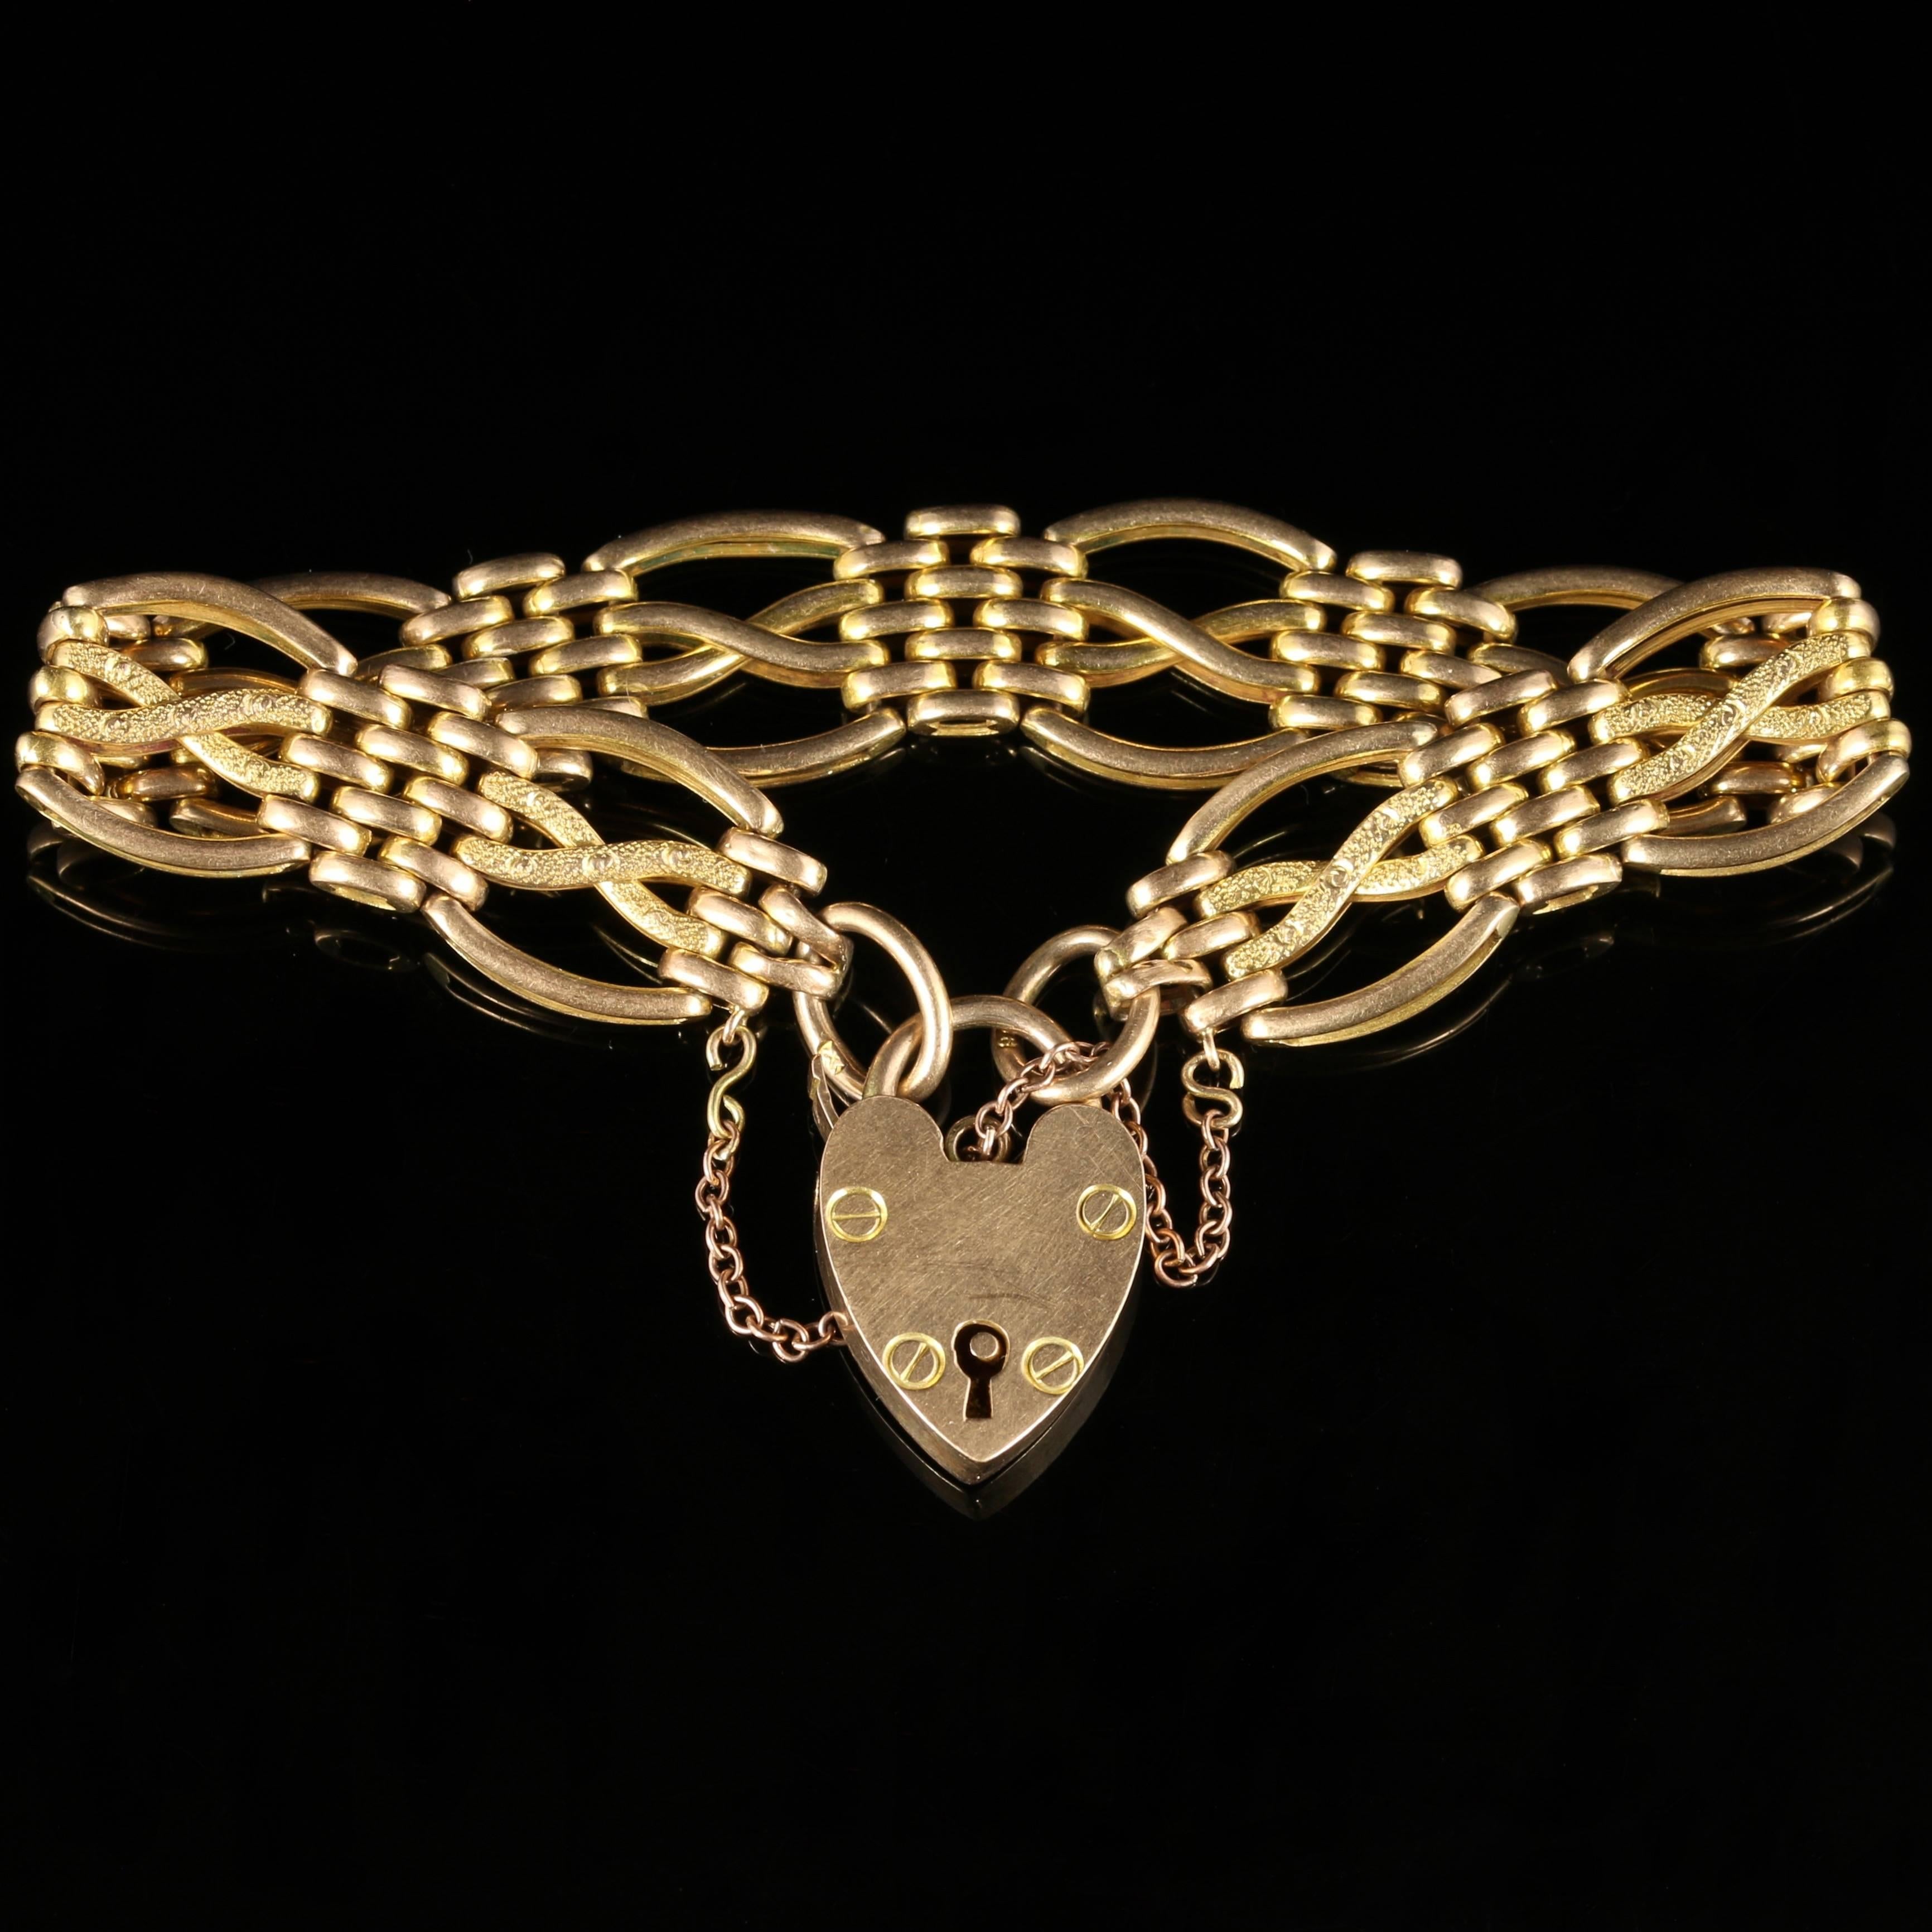 For more details please click continue reading down below...

This fabulous Antique Victorian bracelet is solid 9ct Yellow Gold set with beautiful workmanship all round.

Circa 1900

Each link is set with gorgeous engraving.

Complete with a safety